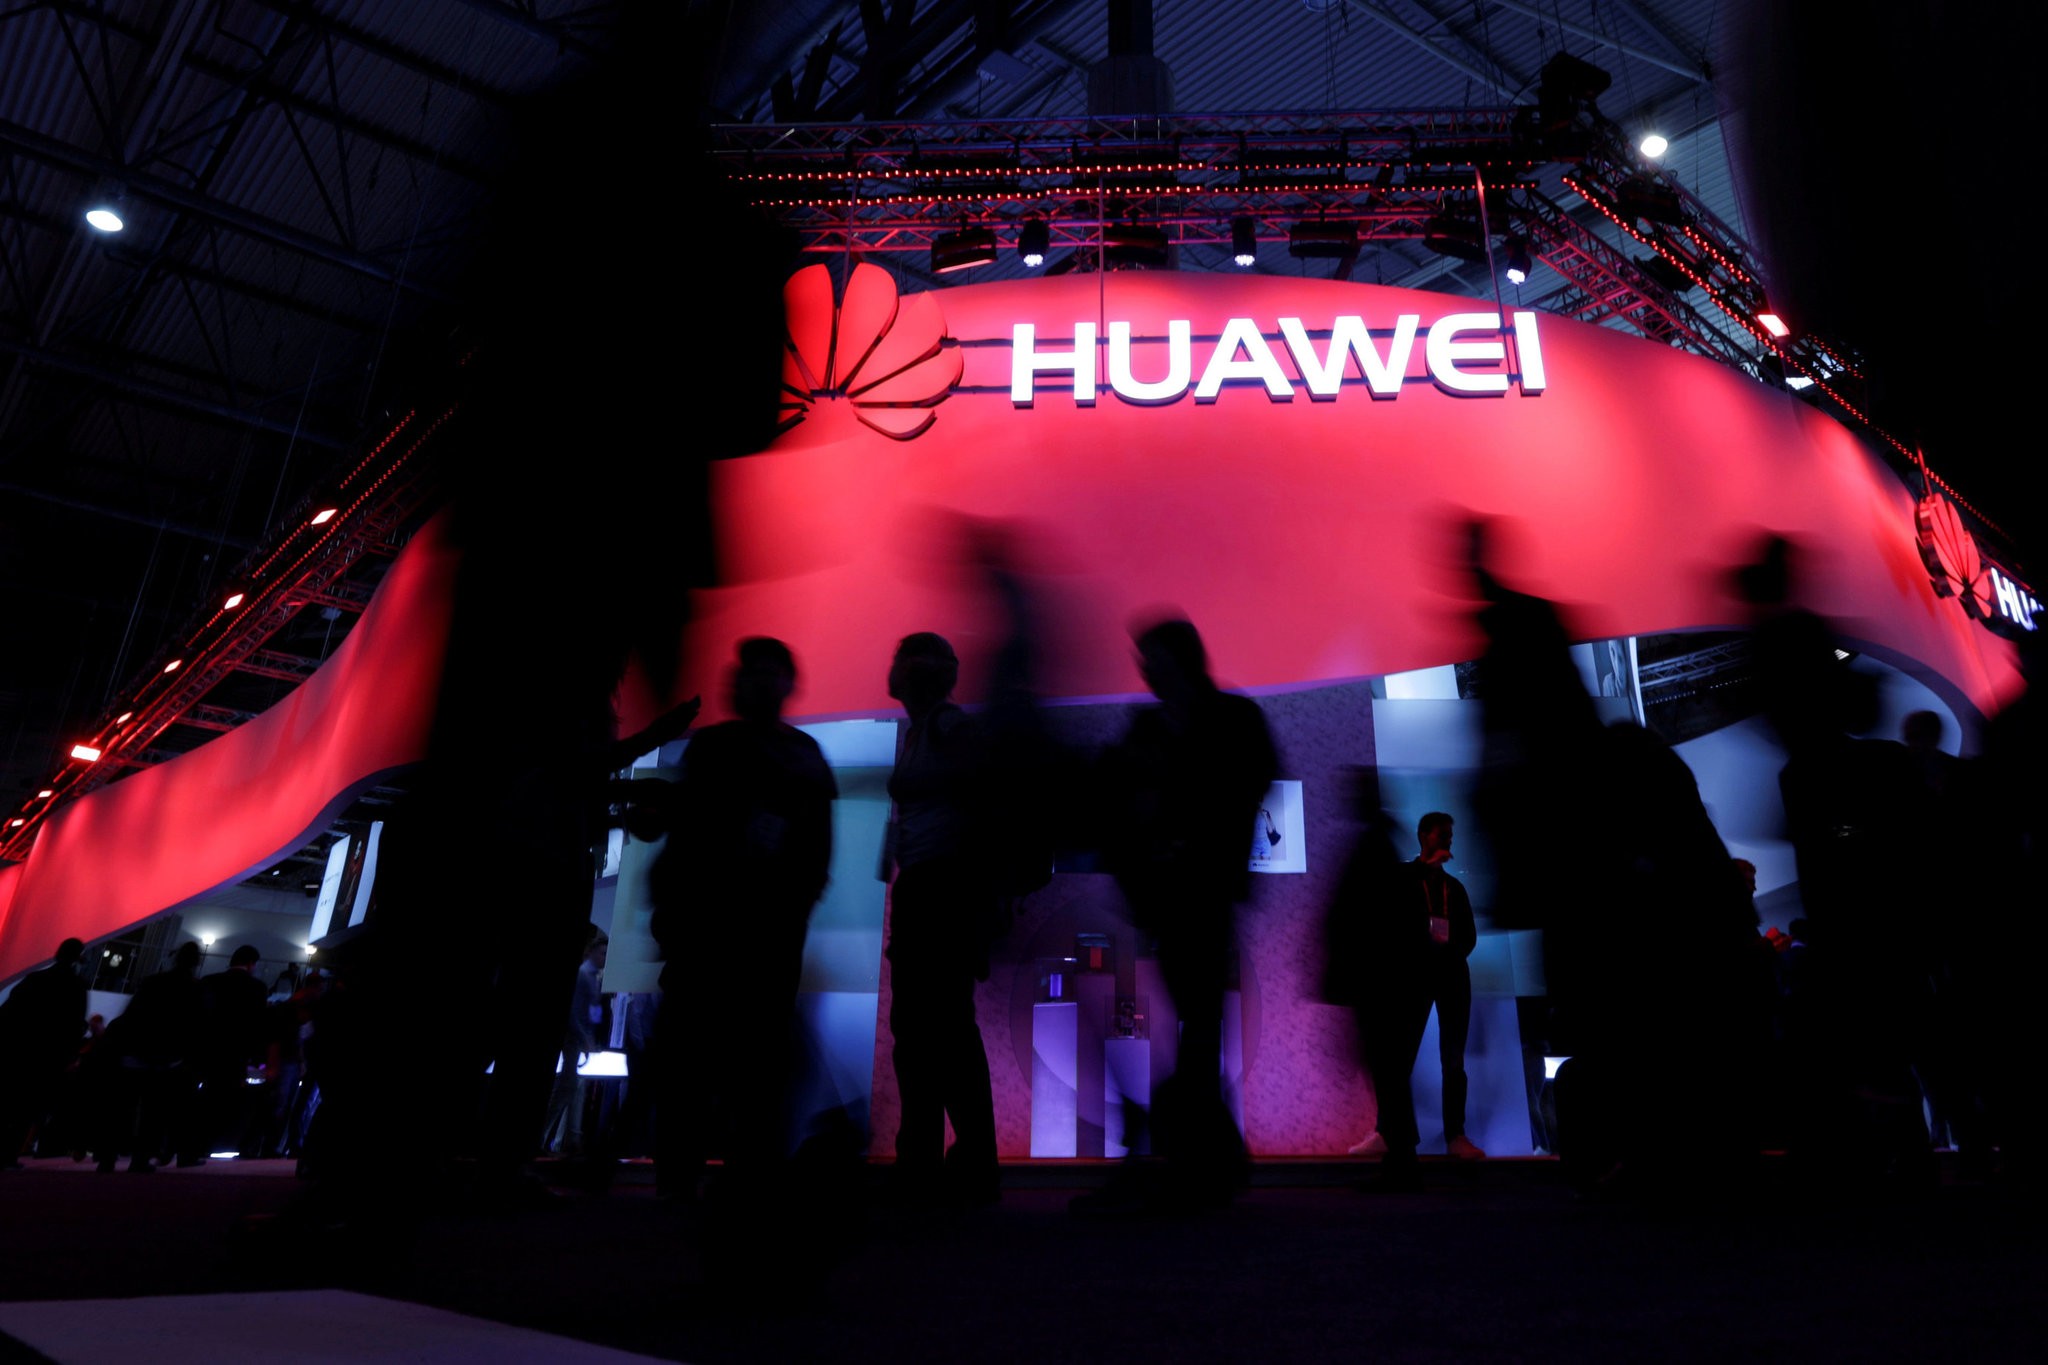 Saudi welcomes china’s controversial tech giant Huawei, ignores US security concerns